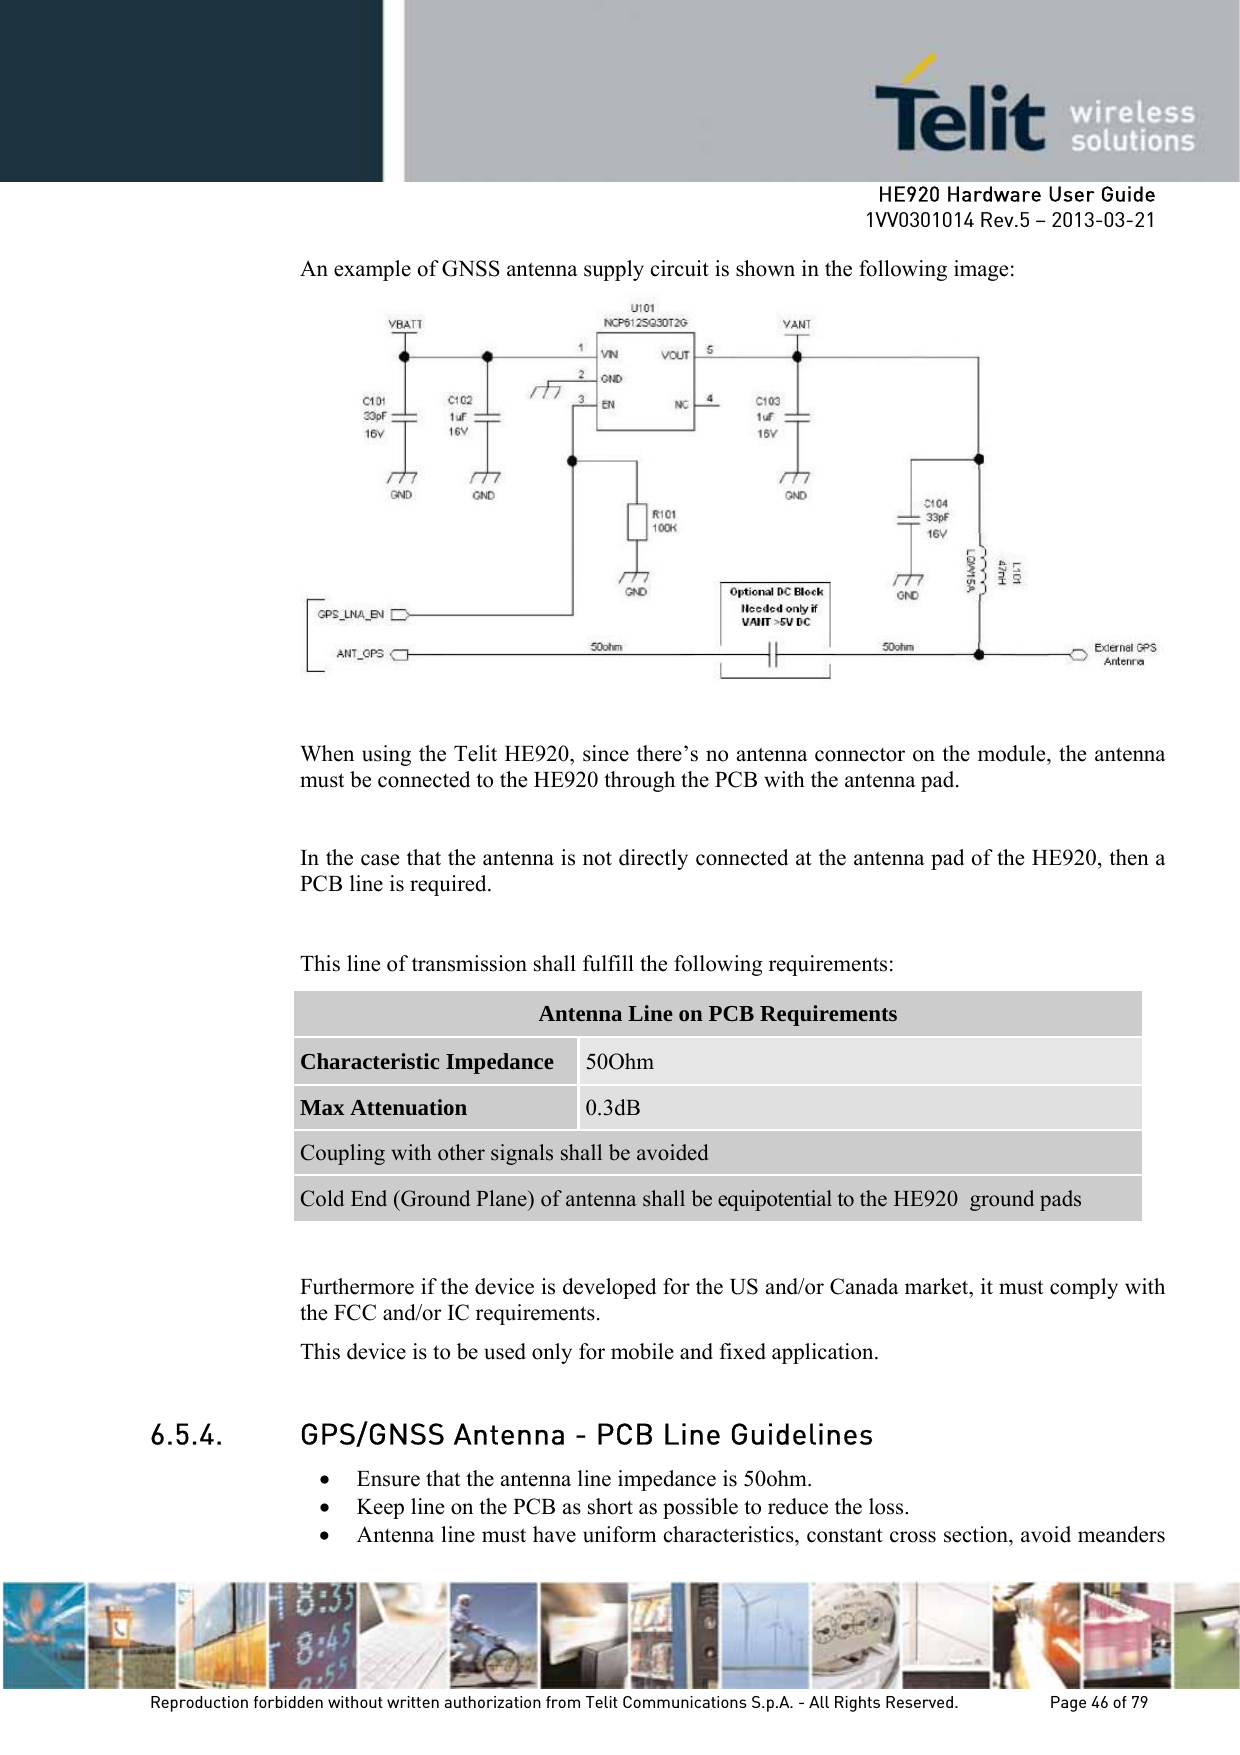     HE920 Hardware User Guide 1VV0301014 Rev.5 – 2013-03-21 Reproduction forbidden without written authorization from Telit Communications S.p.A. - All Rights Reserved.    Page 46 of 79  An example of GNSS antenna supply circuit is shown in the following image:   When using the Telit HE920, since there’s no antenna connector on the module, the antenna must be connected to the HE920 through the PCB with the antenna pad.   In the case that the antenna is not directly connected at the antenna pad of the HE920, then a PCB line is required.  This line of transmission shall fulfill the following requirements: Antenna Line on PCB Requirements Characteristic Impedance  50Ohm Max Attenuation  0.3dB Coupling with other signals shall be avoided Cold End (Ground Plane) of antenna shall be equipotential to the HE920  ground pads  Furthermore if the device is developed for the US and/or Canada market, it must comply with the FCC and/or IC requirements. This device is to be used only for mobile and fixed application.   6.5.4. GPS/GNSS Antenna - PCB Line Guidelines • Ensure that the antenna line impedance is 50ohm. • Keep line on the PCB as short as possible to reduce the loss. • Antenna line must have uniform characteristics, constant cross section, avoid meanders 